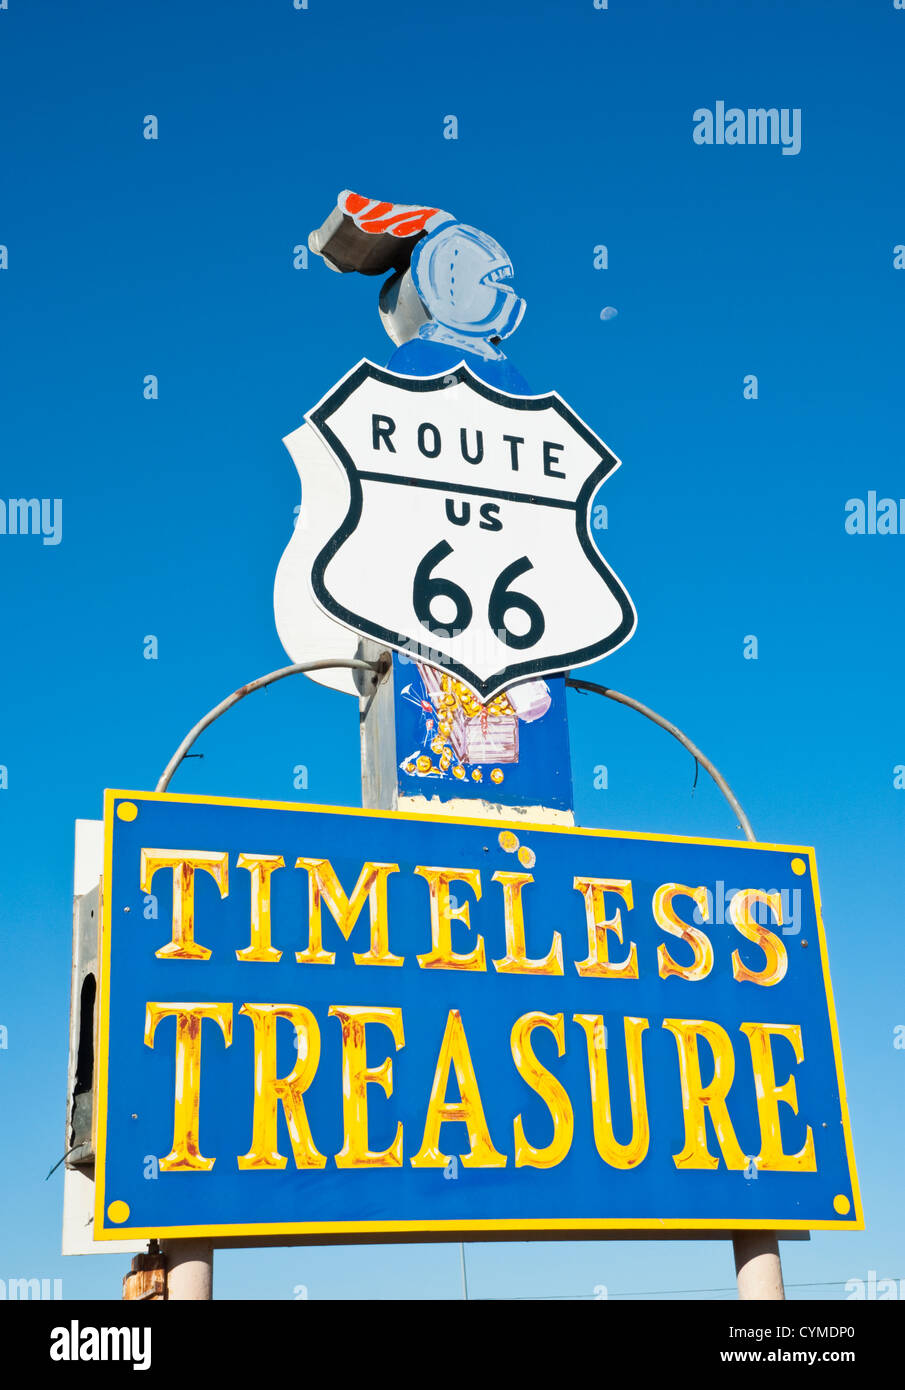 Timeless Treasure is one of many interesting establishments along Route 66 in Tucumcari. Stock Photo